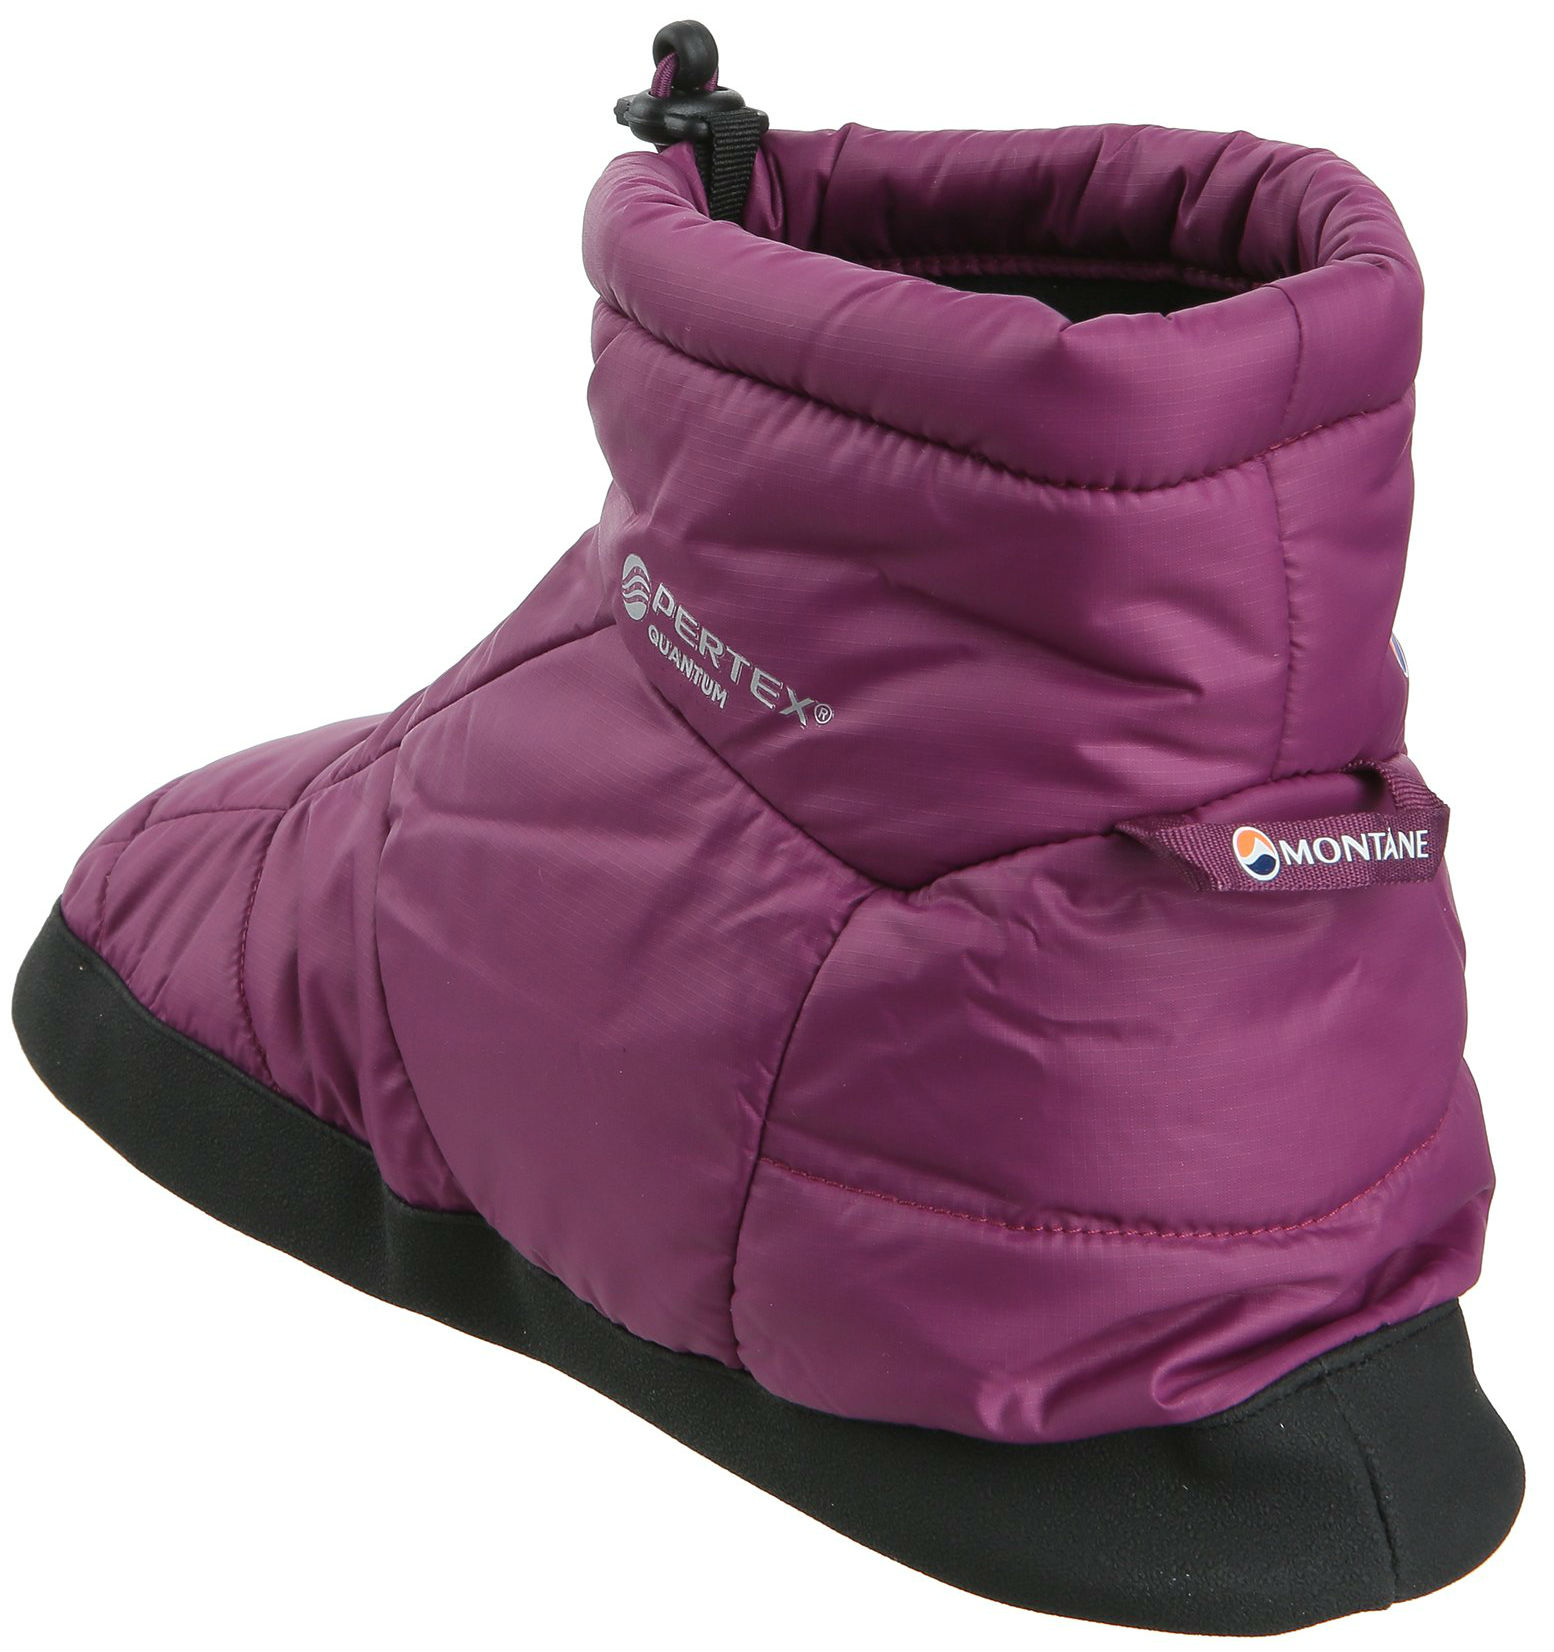 Montane Prism Bootie Insulated Camping Slippers